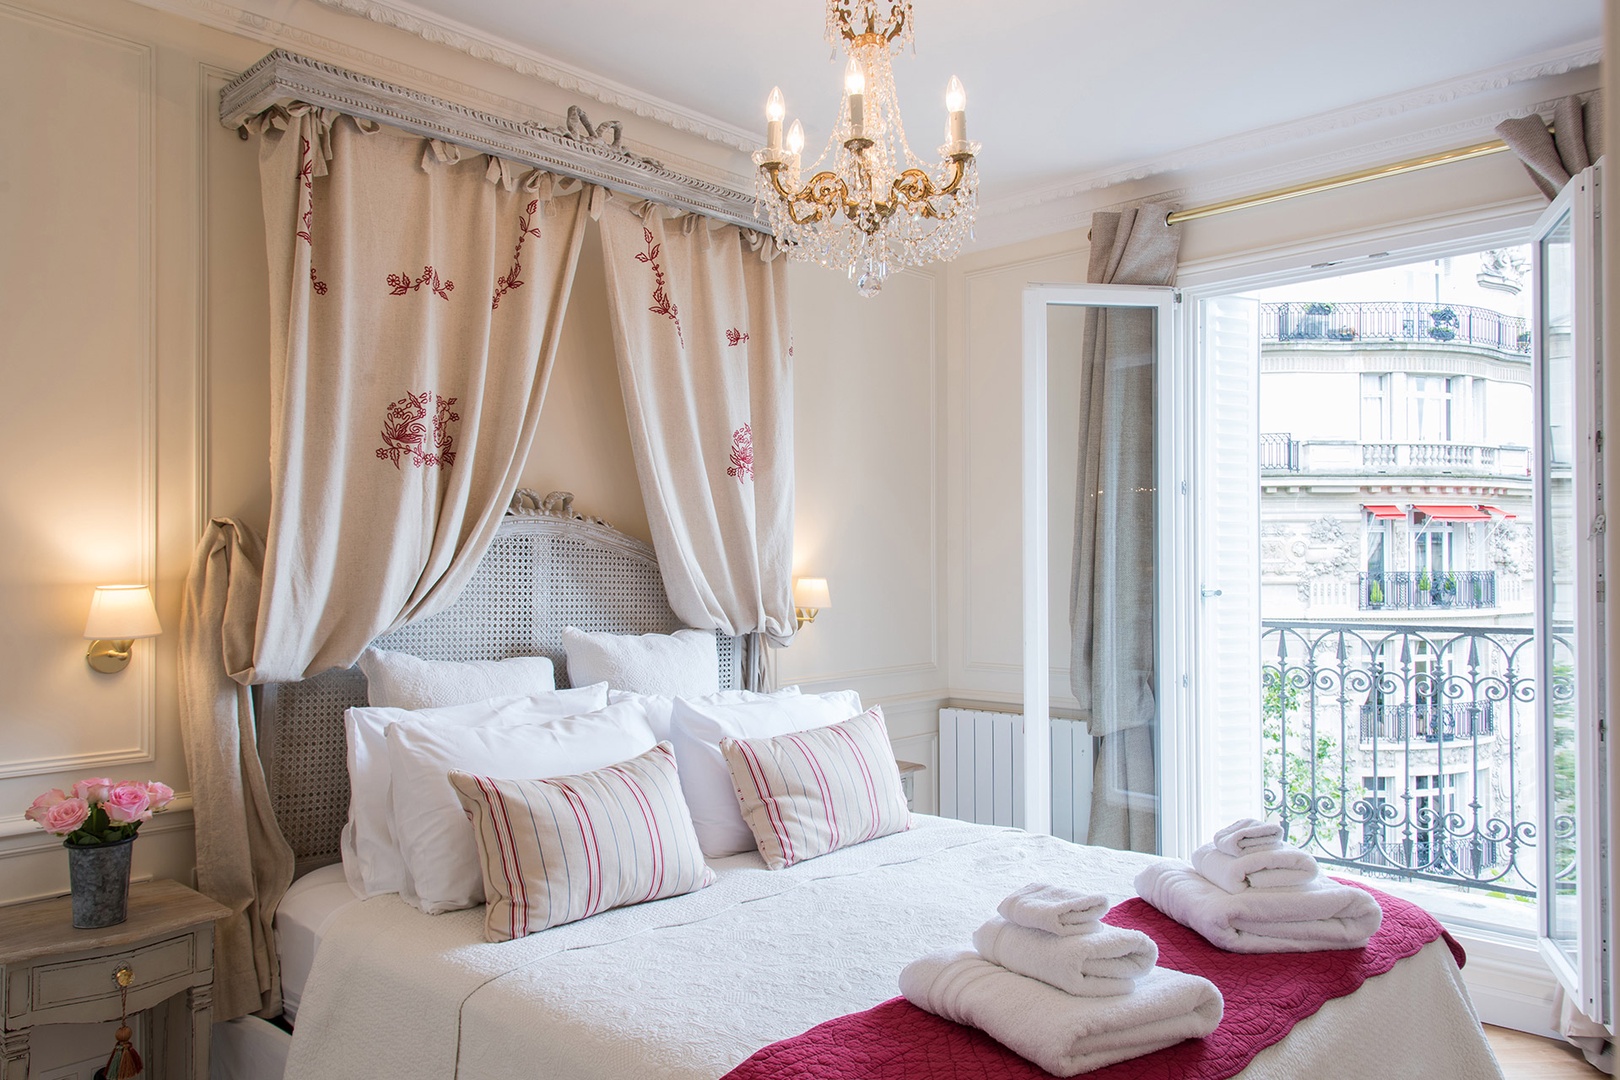 Relax in the romantic bedroom 1 with large French windows.